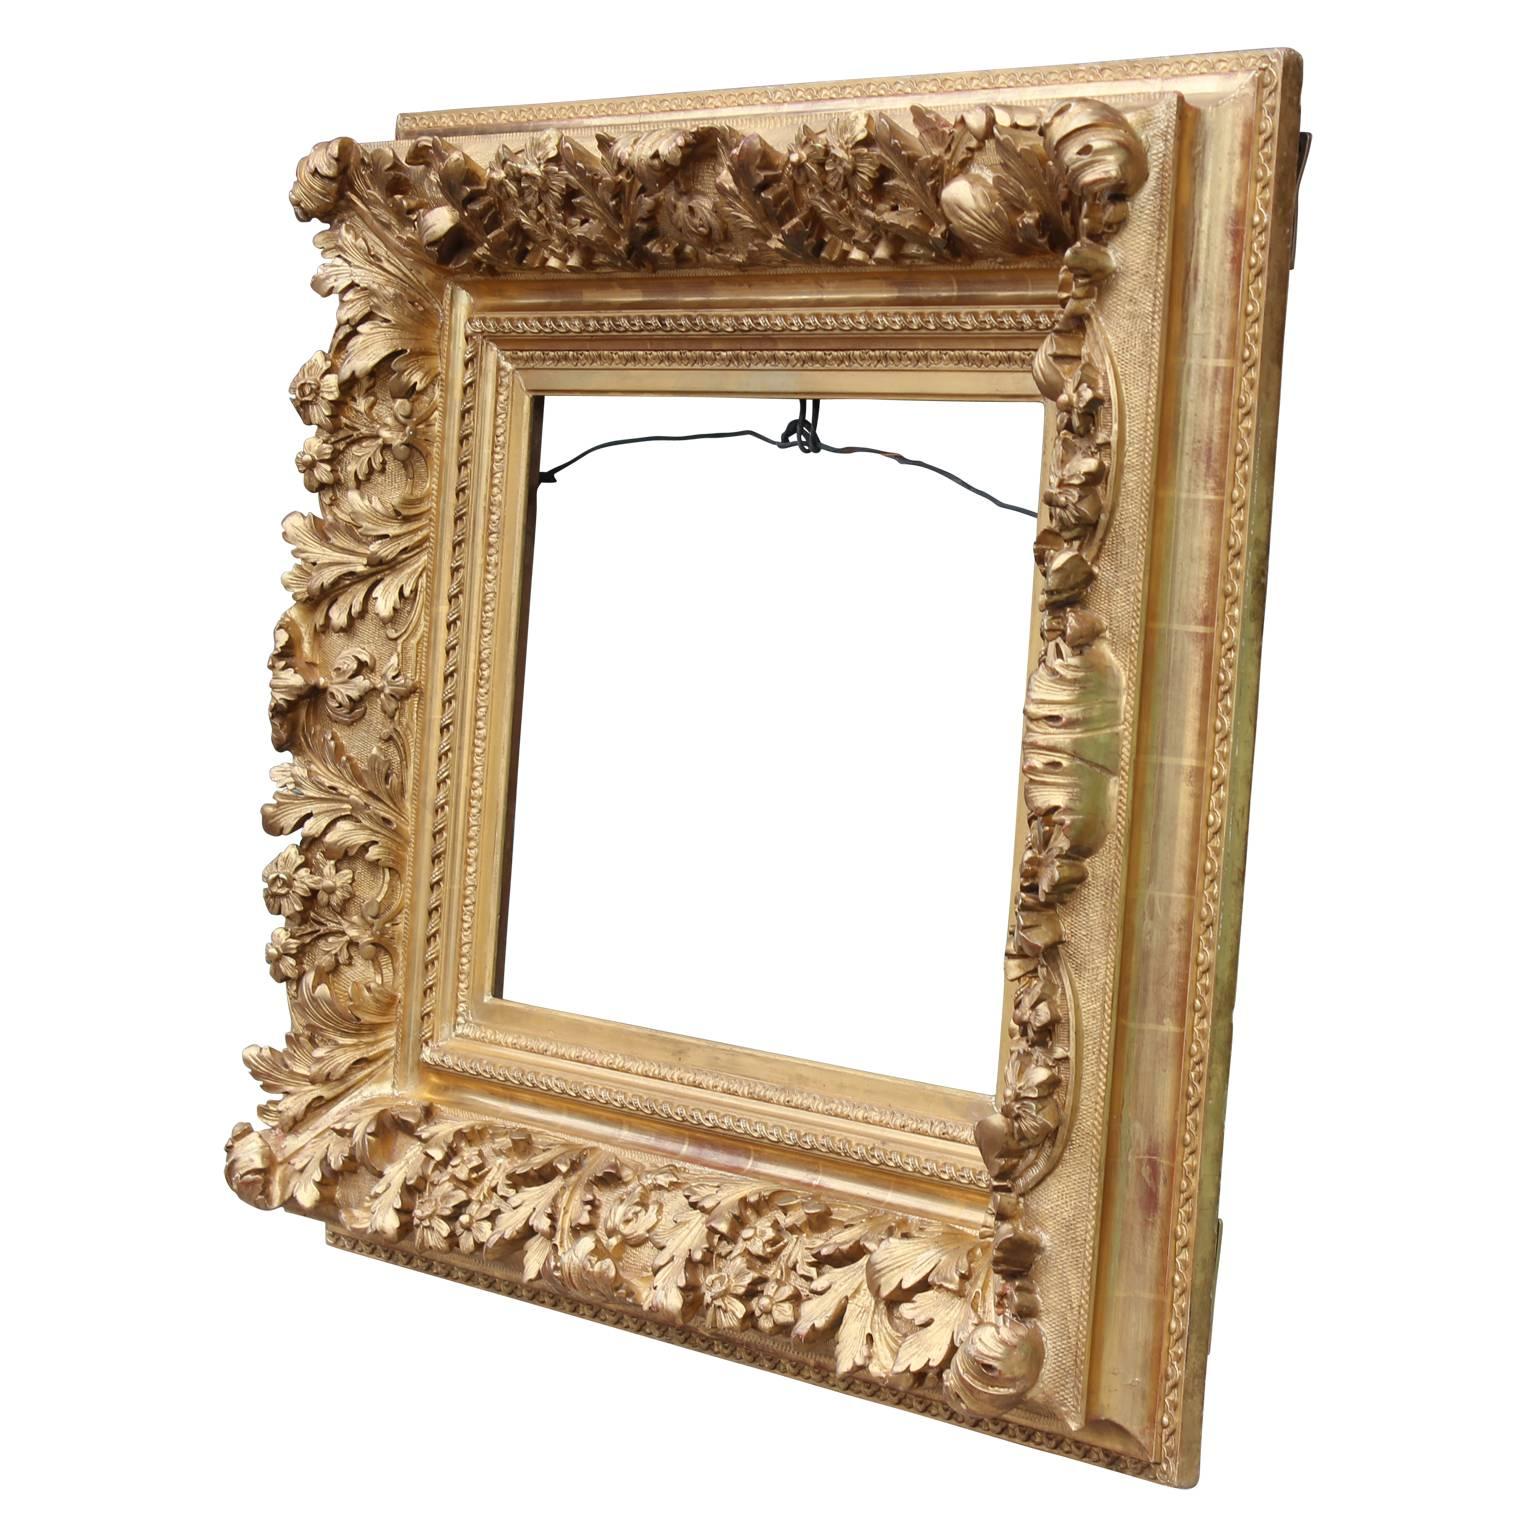 Gorgeous 19th century highly carved French Baroque / Florentine style gilt frame. Absolutely stunning. Would make a lovely frame for a mirror or painting. Purchased at Sotheby's. 

Dimensions of the inside of the frame:
24 in W x 17 in H.

 